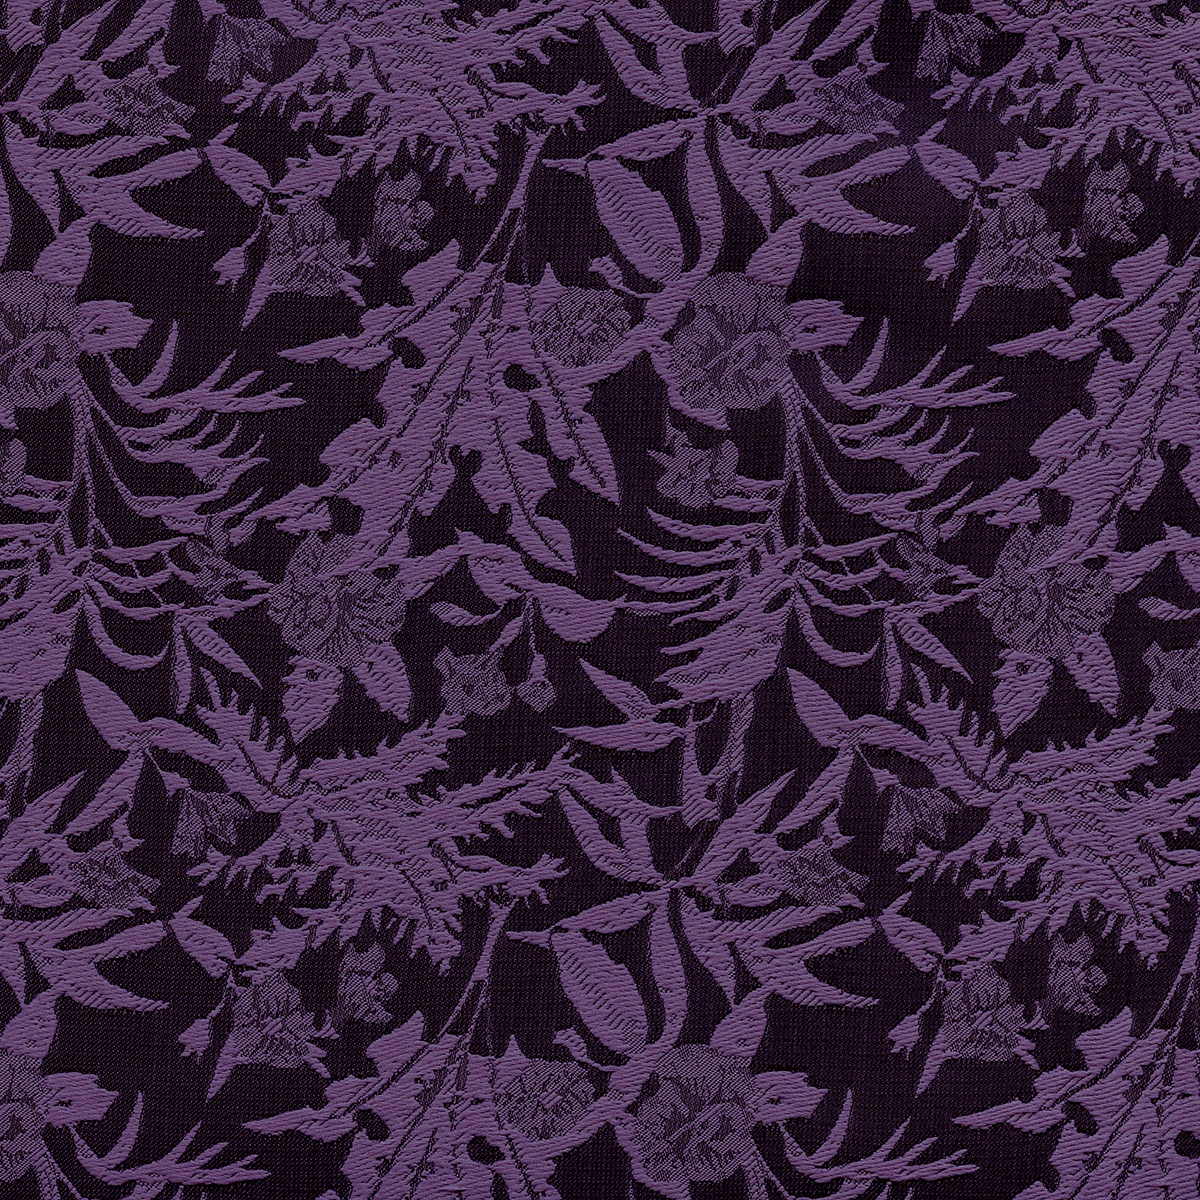 Fabric Polyester Jacquard; LTFZ165-004 Asian Floral Purple 